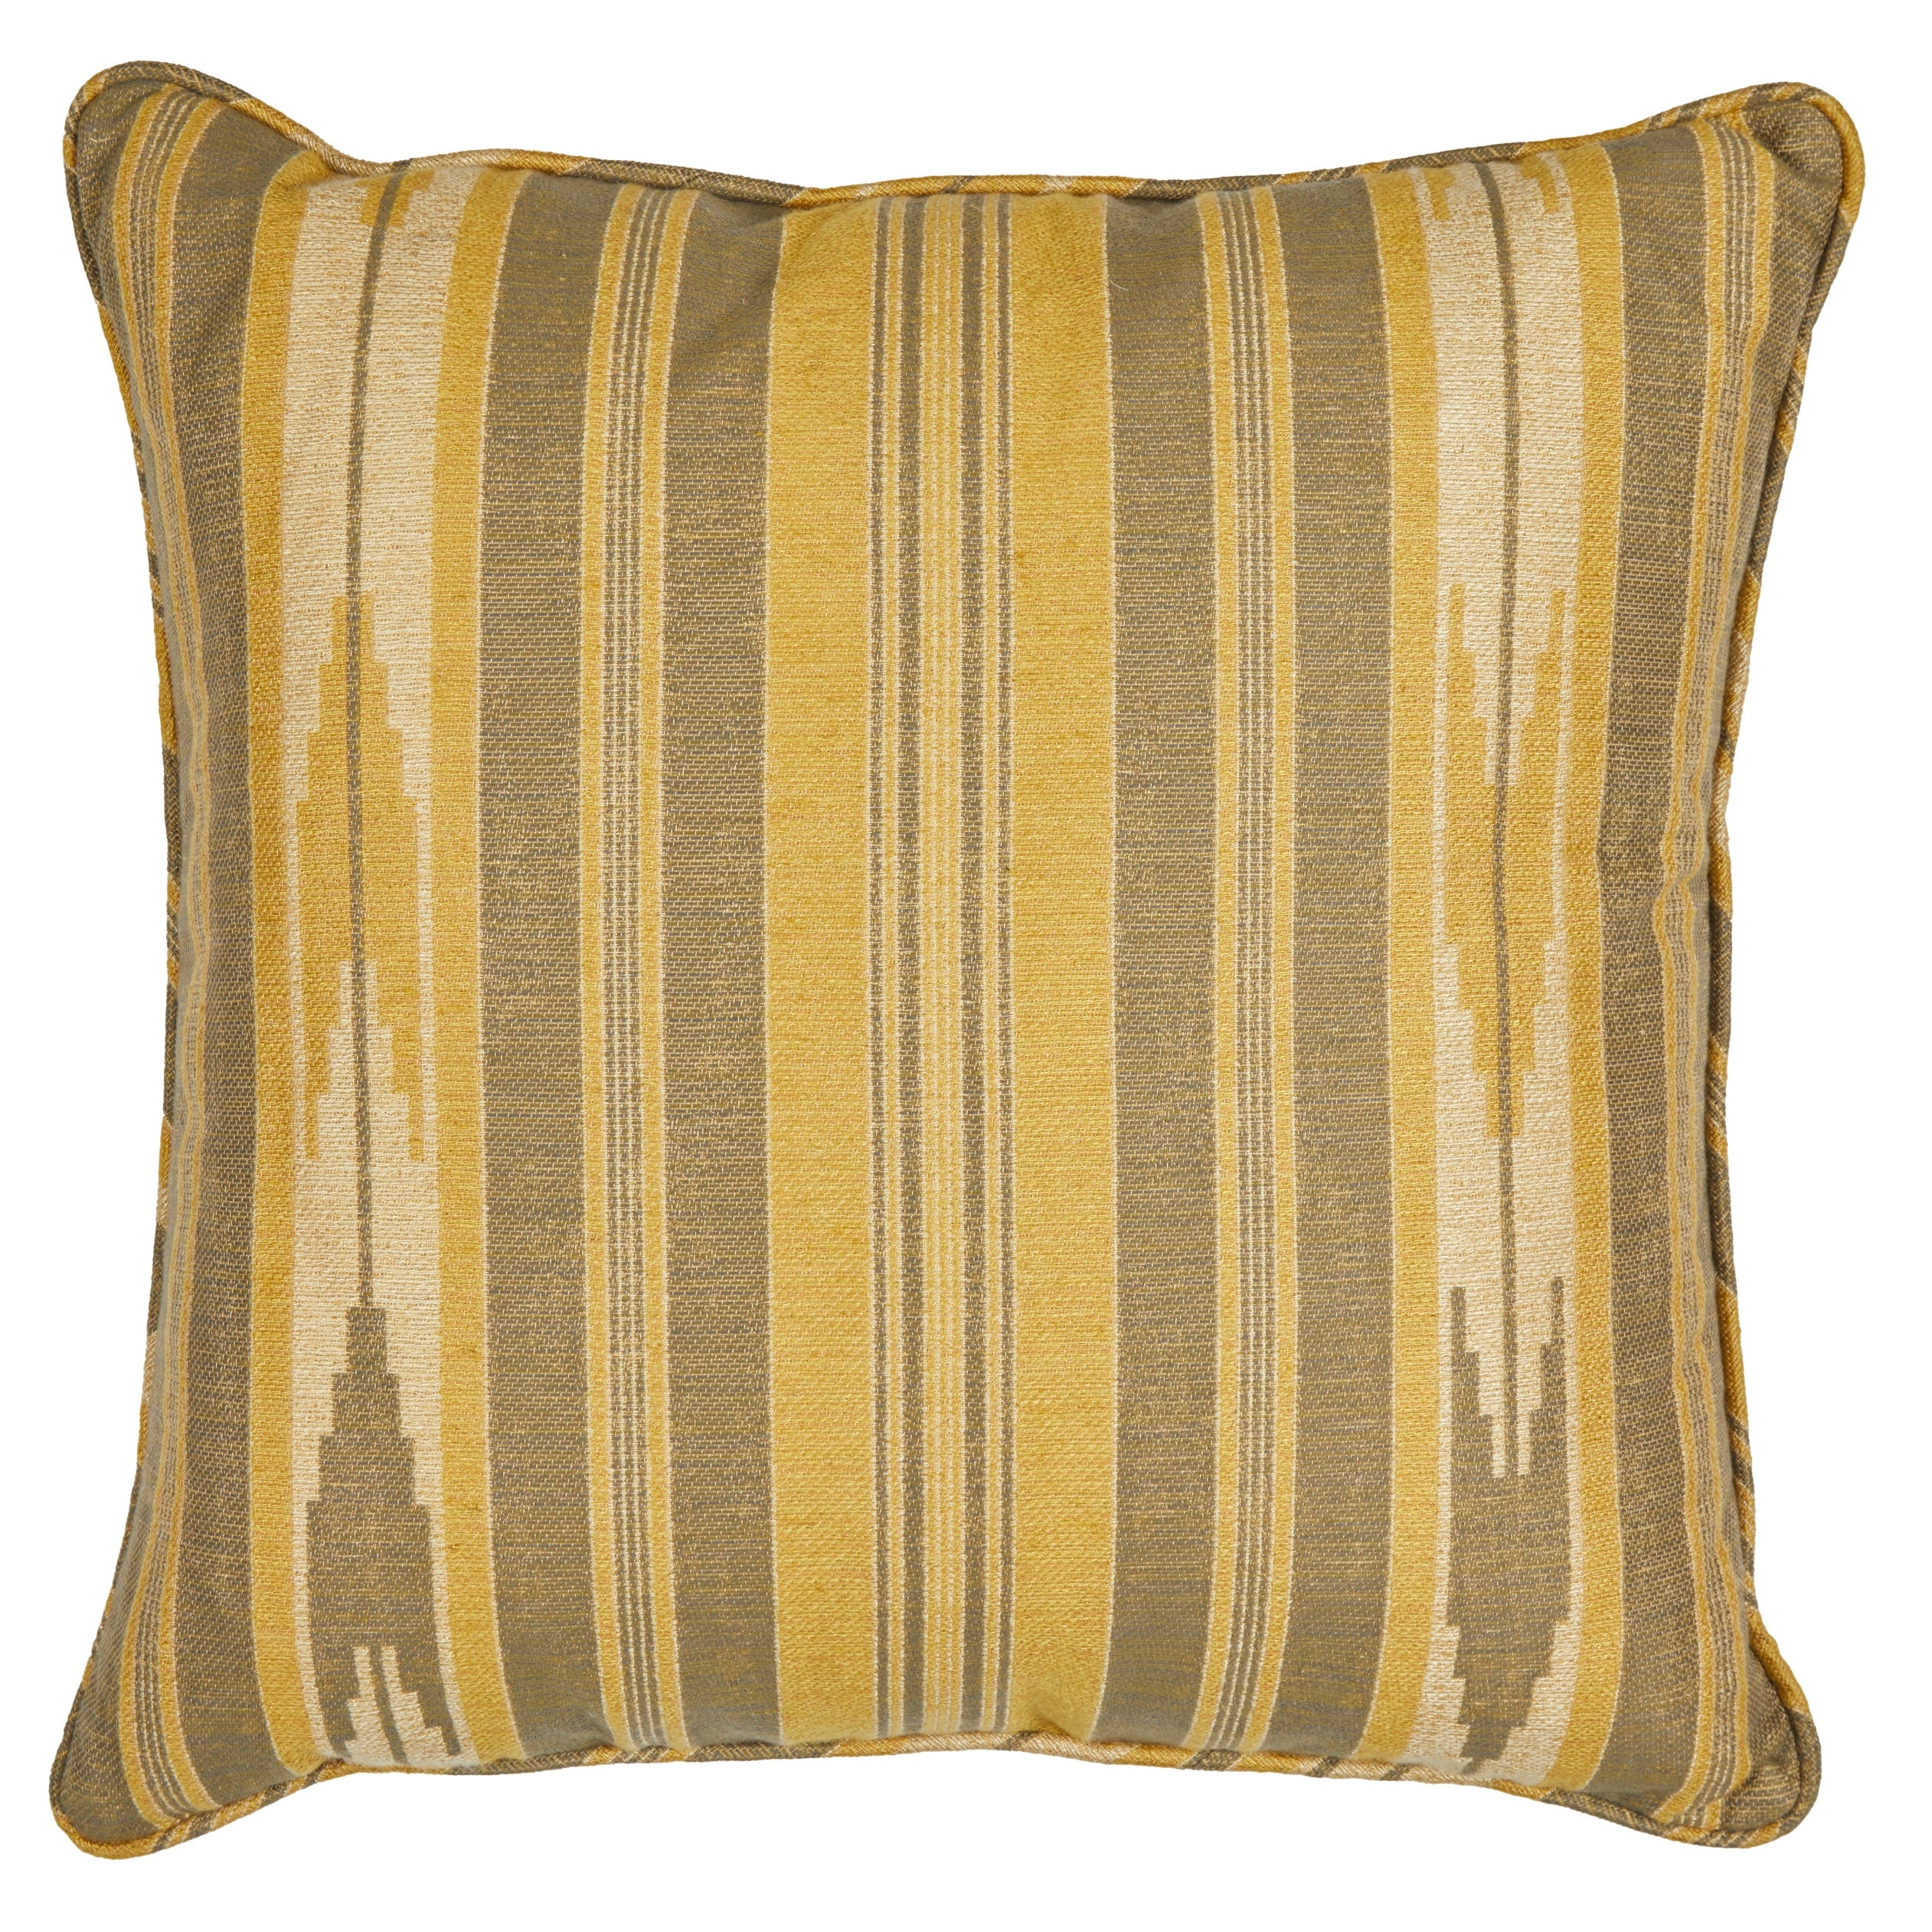 Oulton Stripe Citrine Cushion with Self Piping